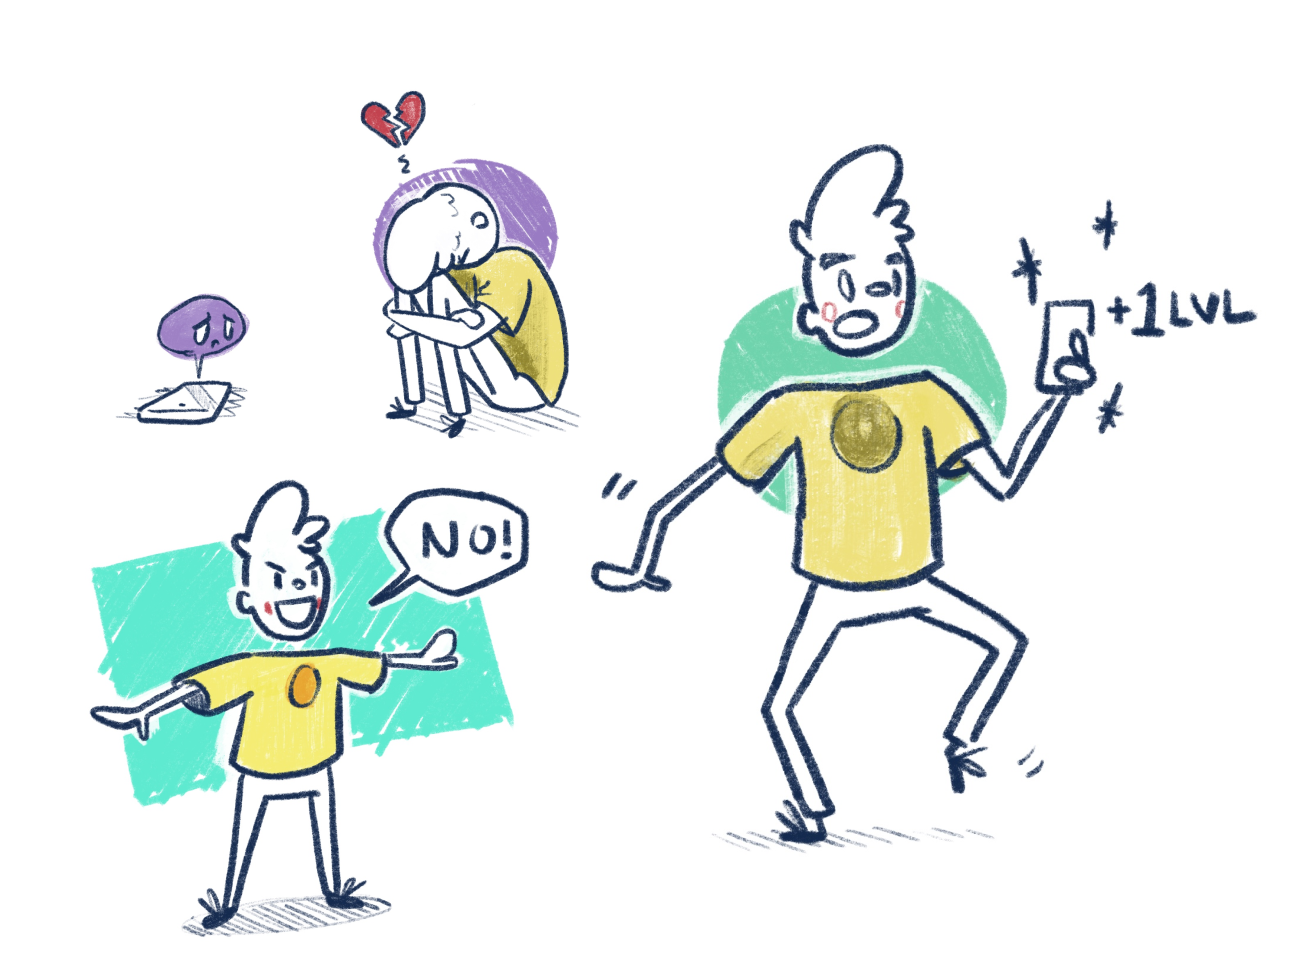 a character in a a yellow shirt in three scenes: in heartbreak with his phone, screaming no, and shocked at receiving a level up